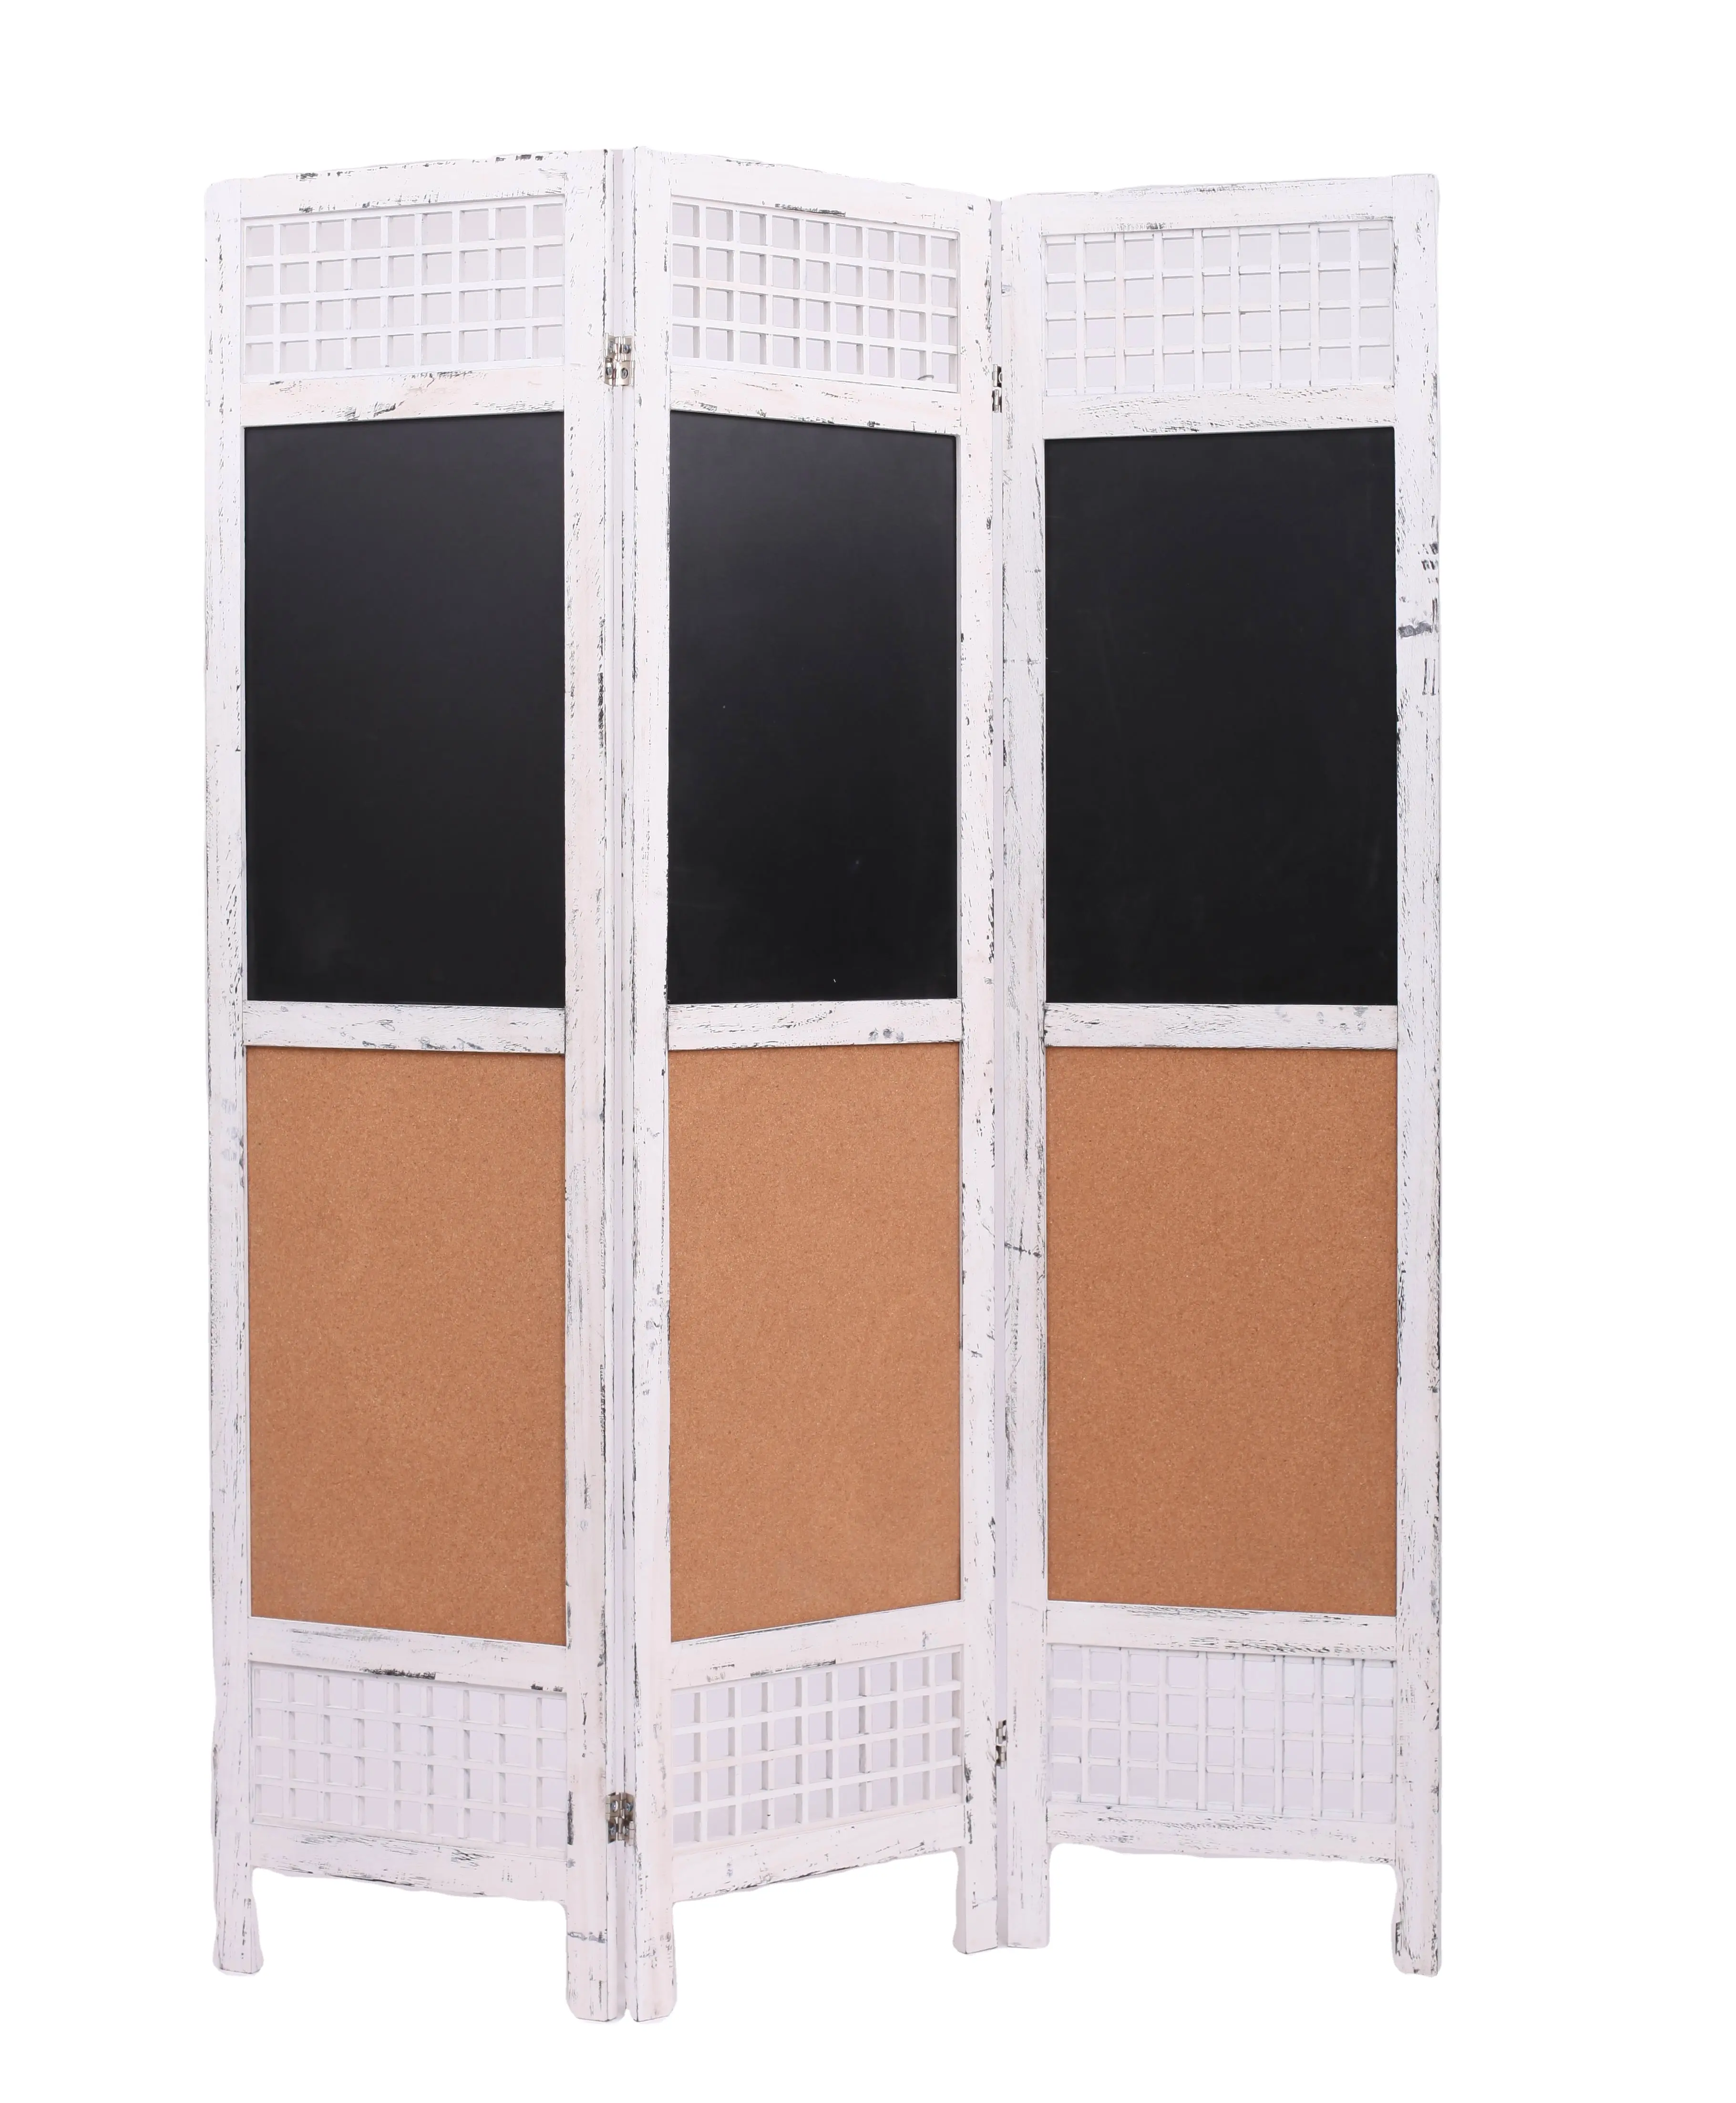 Low Price Living Room Wooden Divider screen in 3 Panel of Blackboard and Cork Screens Room Dividers